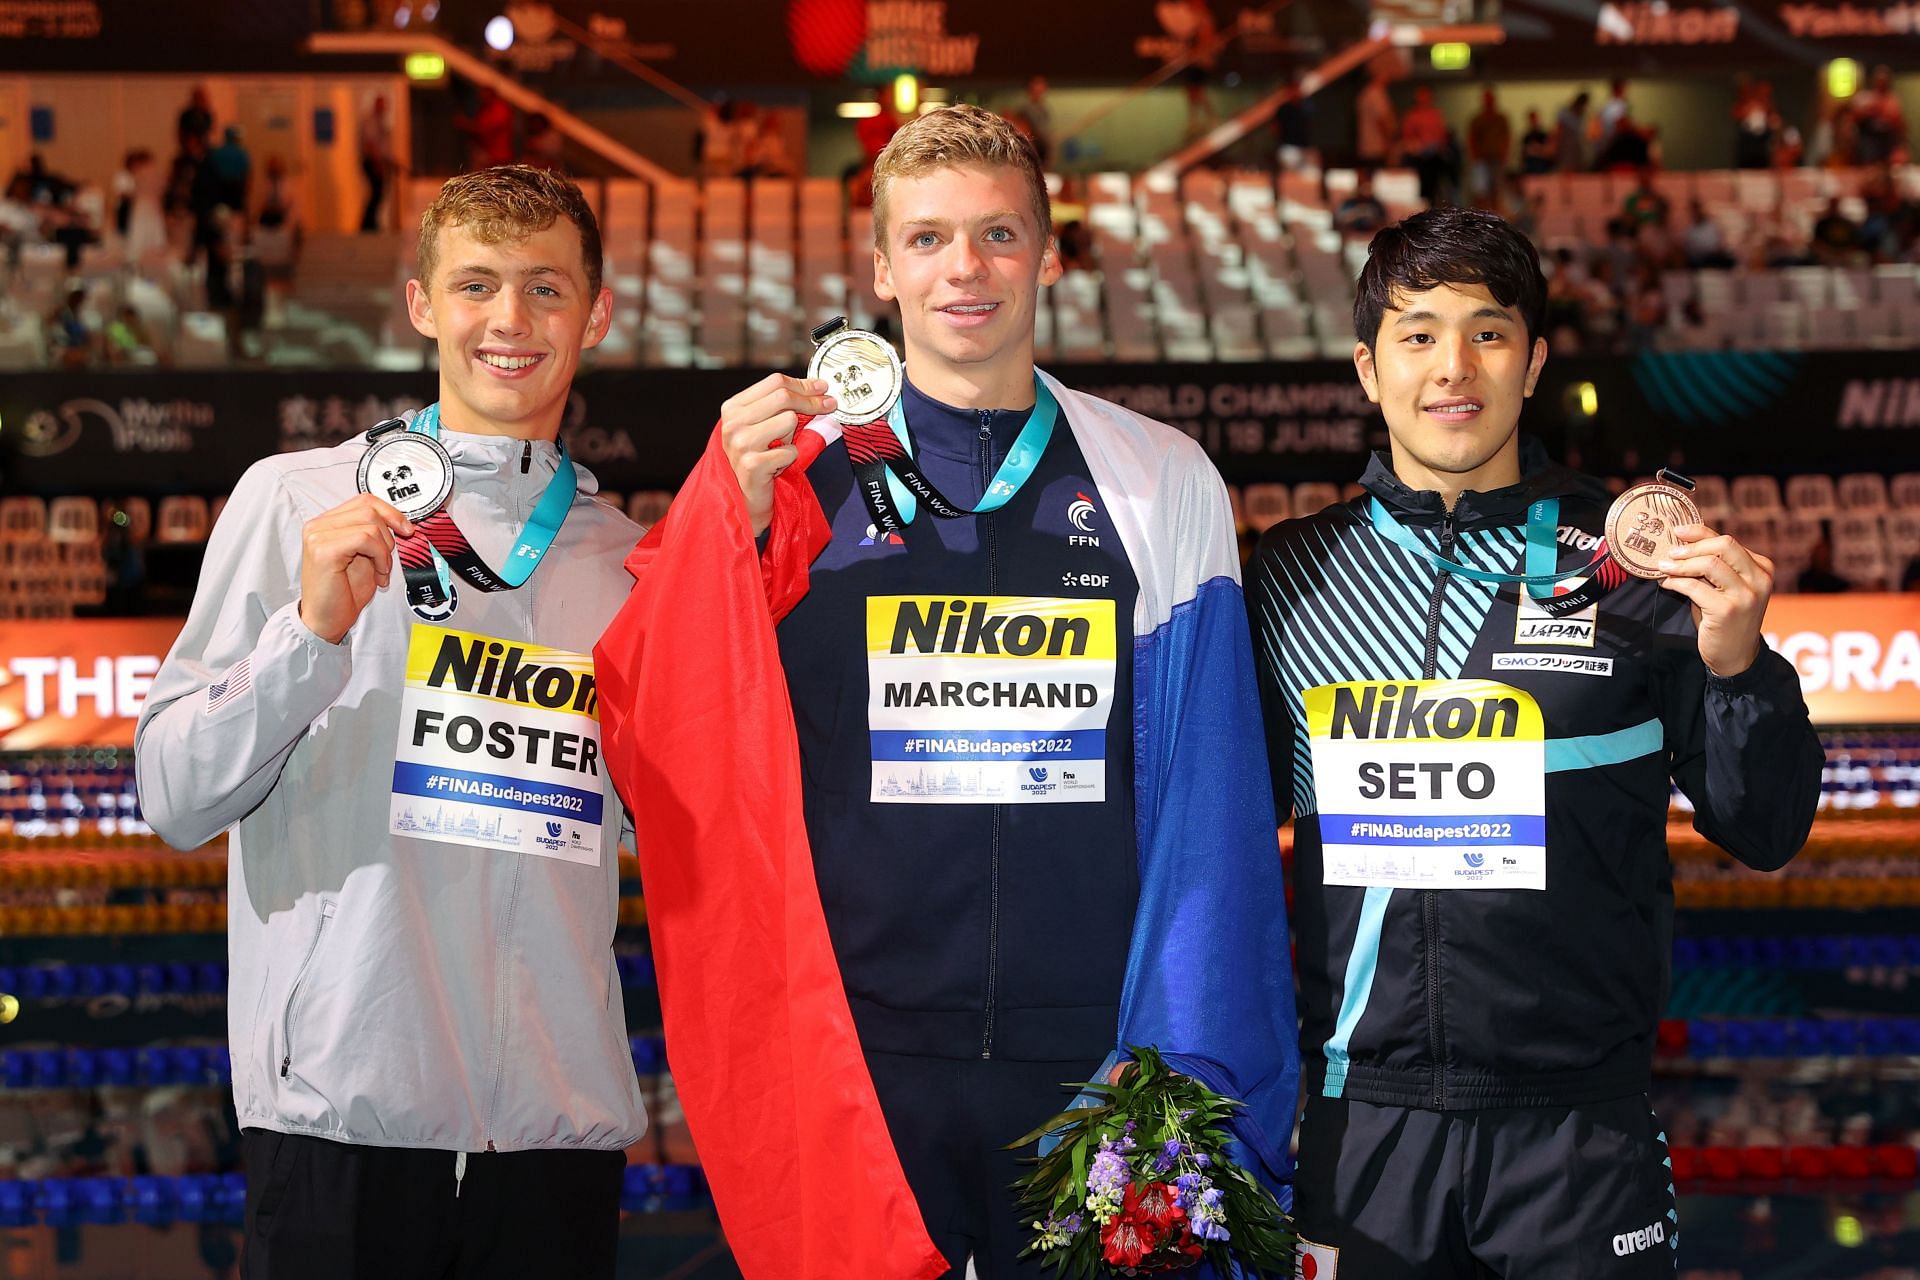 Carson Foster (Silver medalist), Leon Marchand (Gold medalist), and Daiya Seto (Bronze Medalist) pose after the Men&#039;s 200m Individual Medley at the Budapest 2022 FINA World Championships.